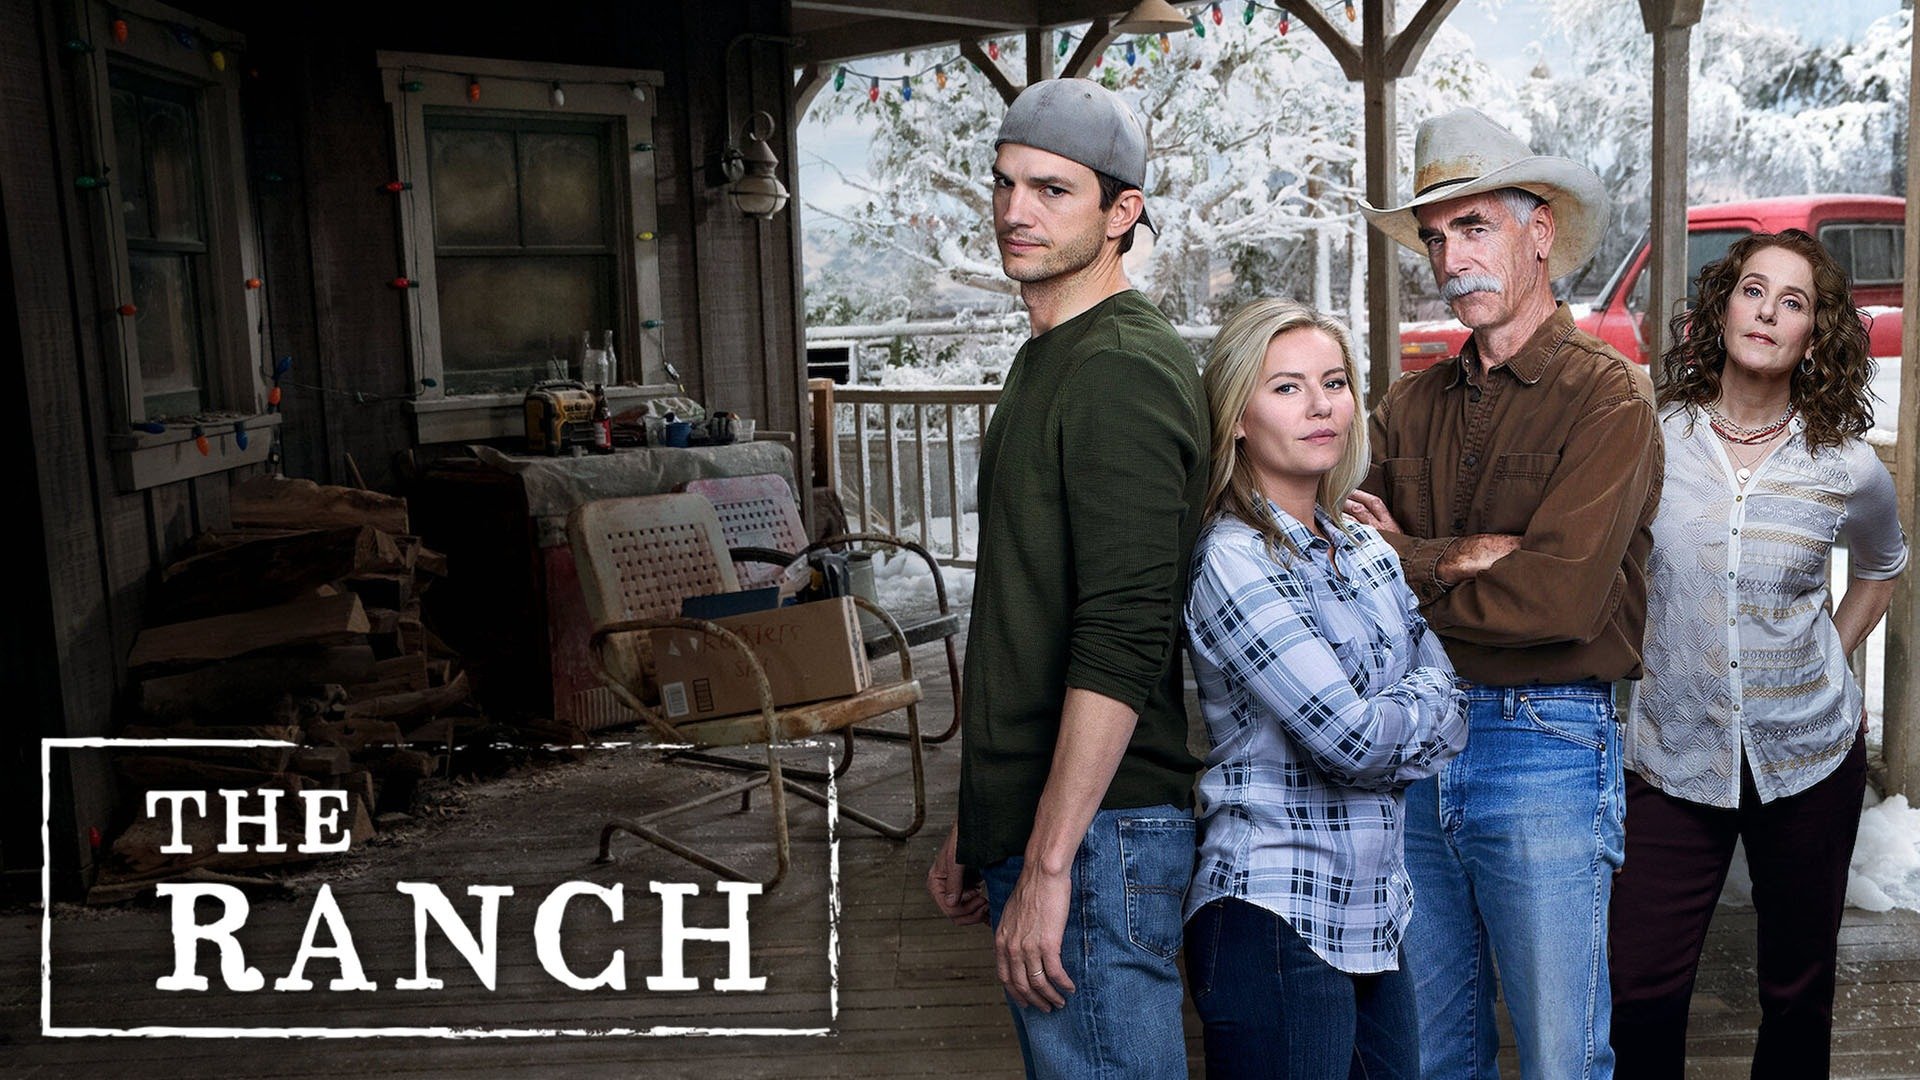 The Ranch Trailers & Videos Rotten Tomatoes